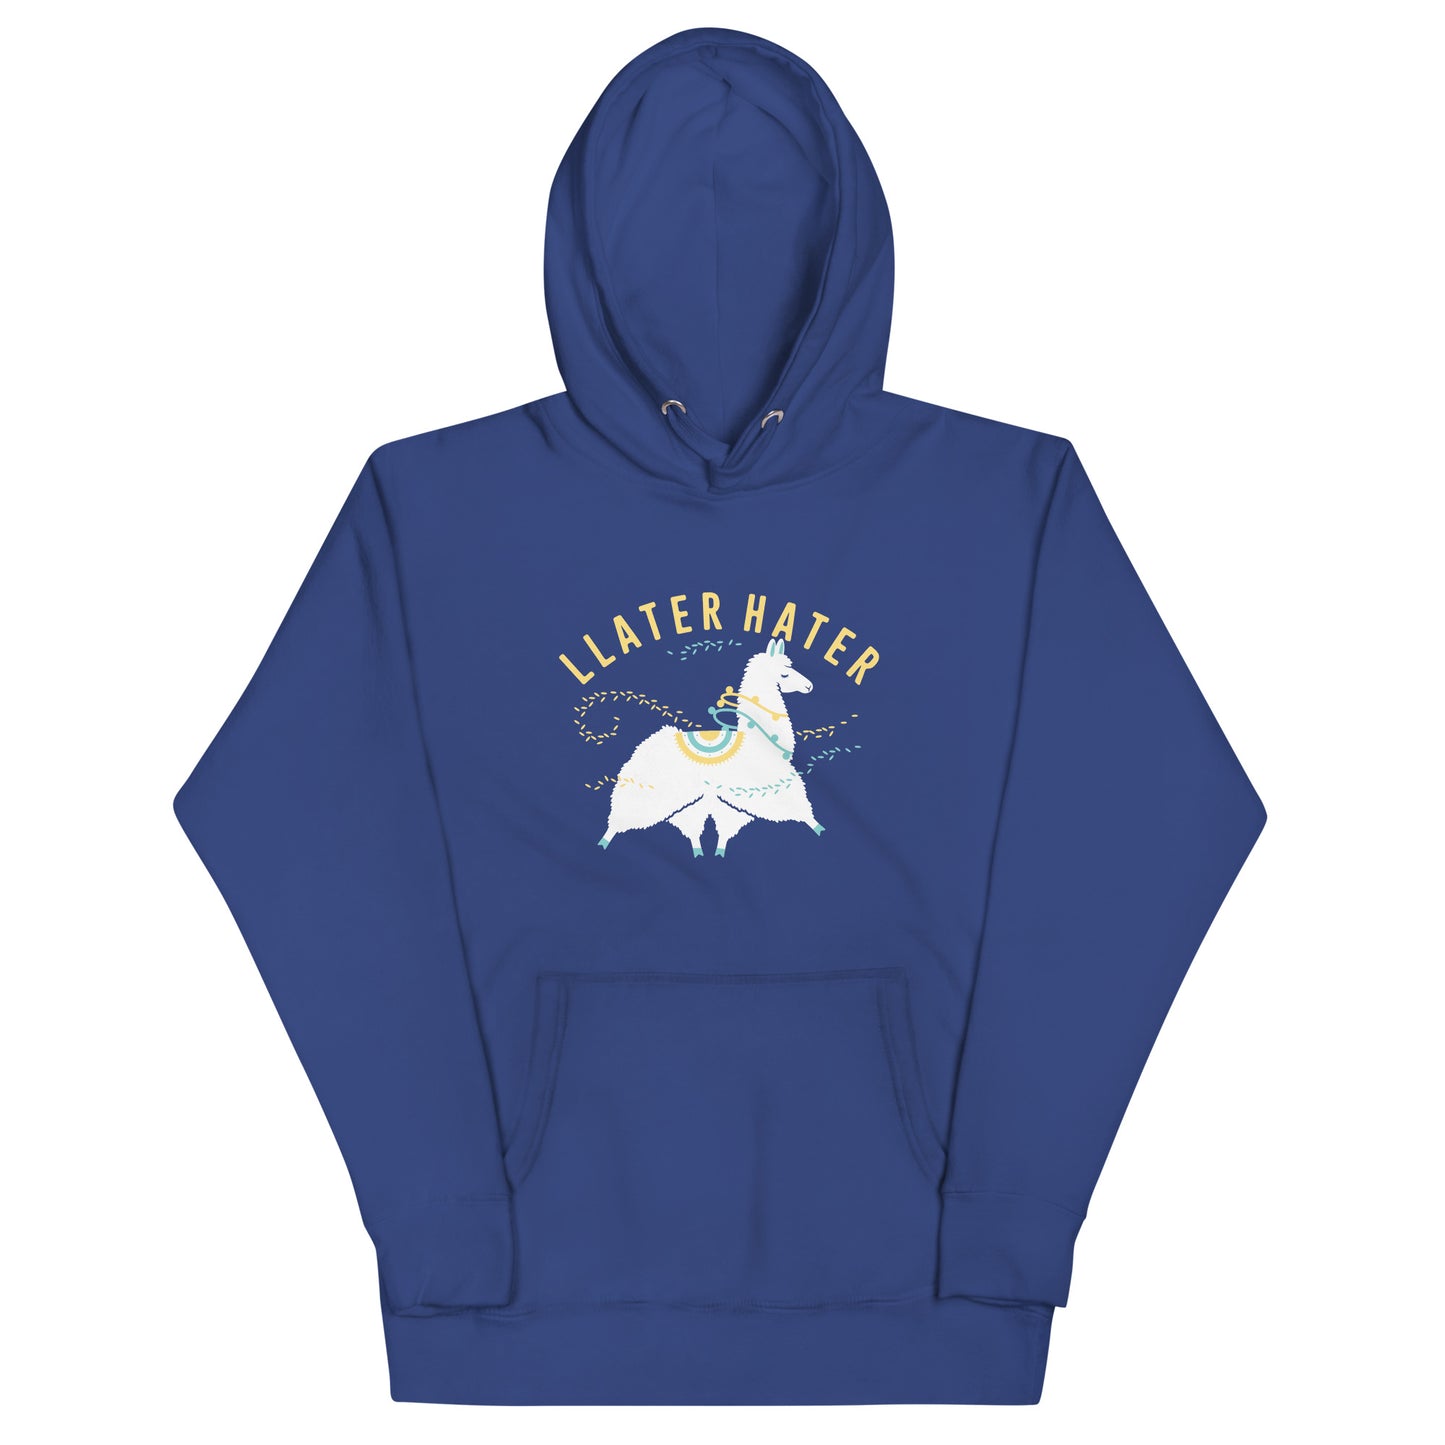 Llater Hater Unisex Hoodie